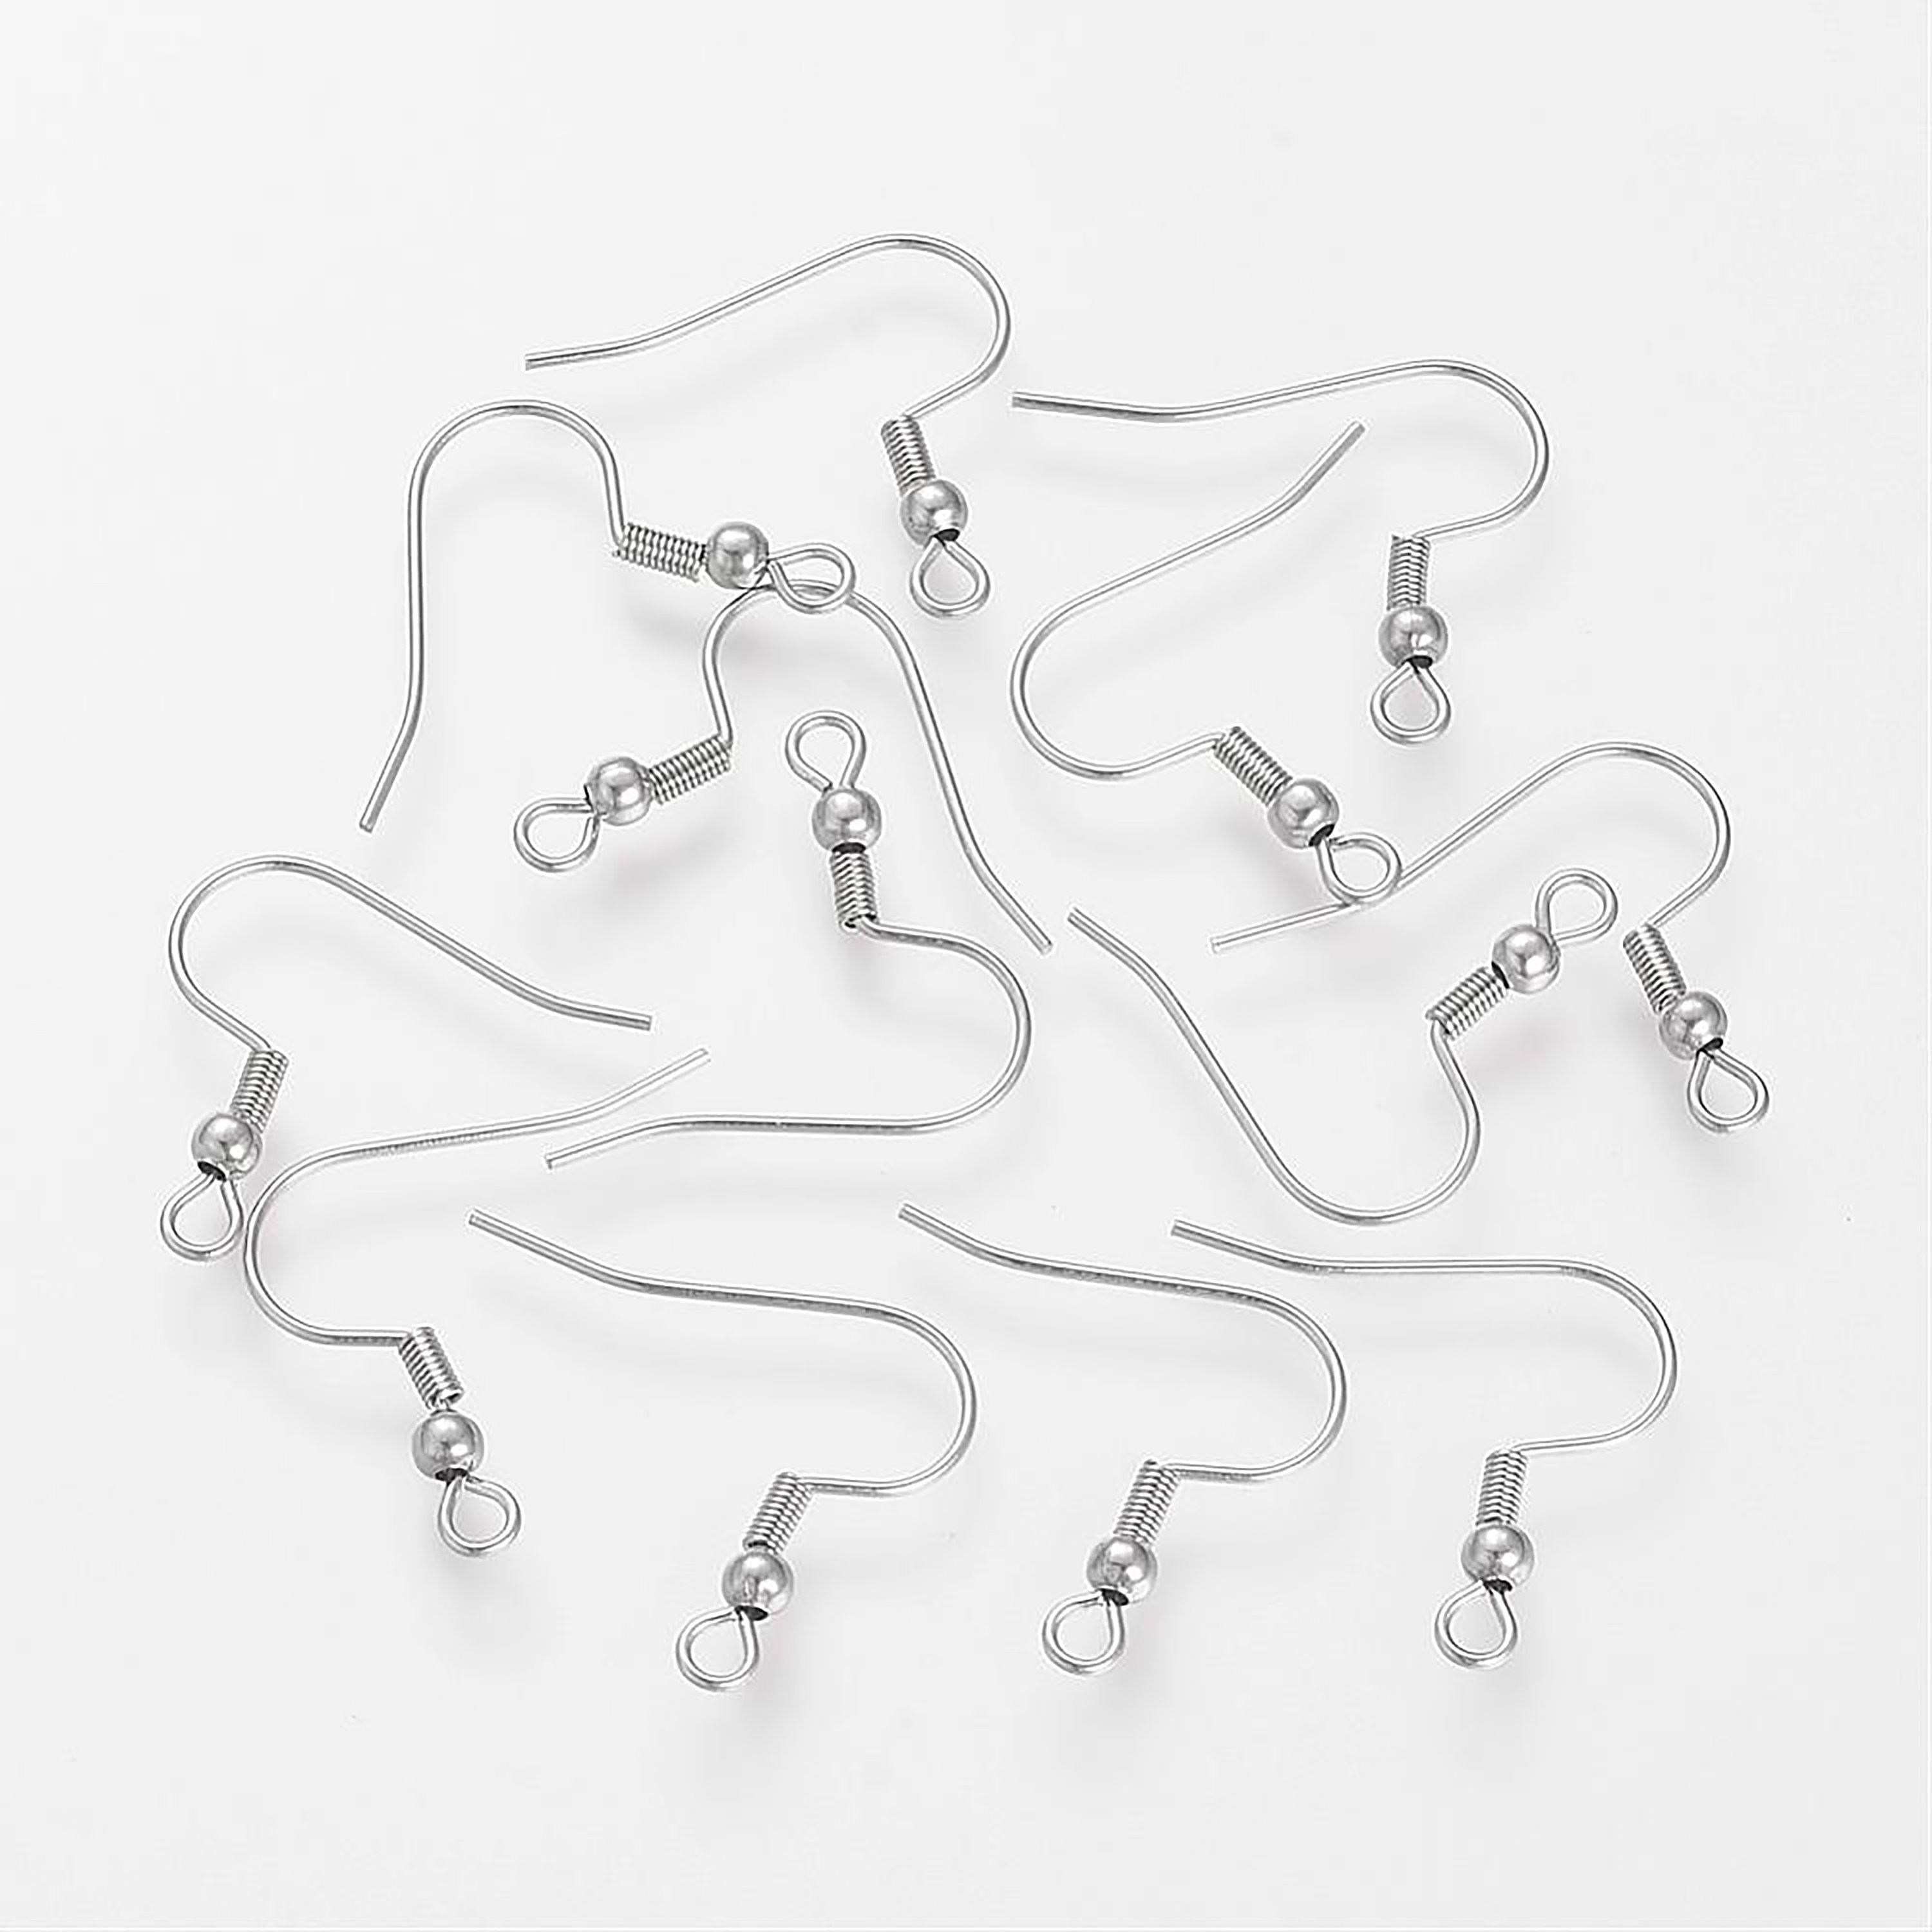 50pcs (25 pairs), 21x21x3mm, 304 Stainless Steel Earring Hooks in Stainless Steel Colour